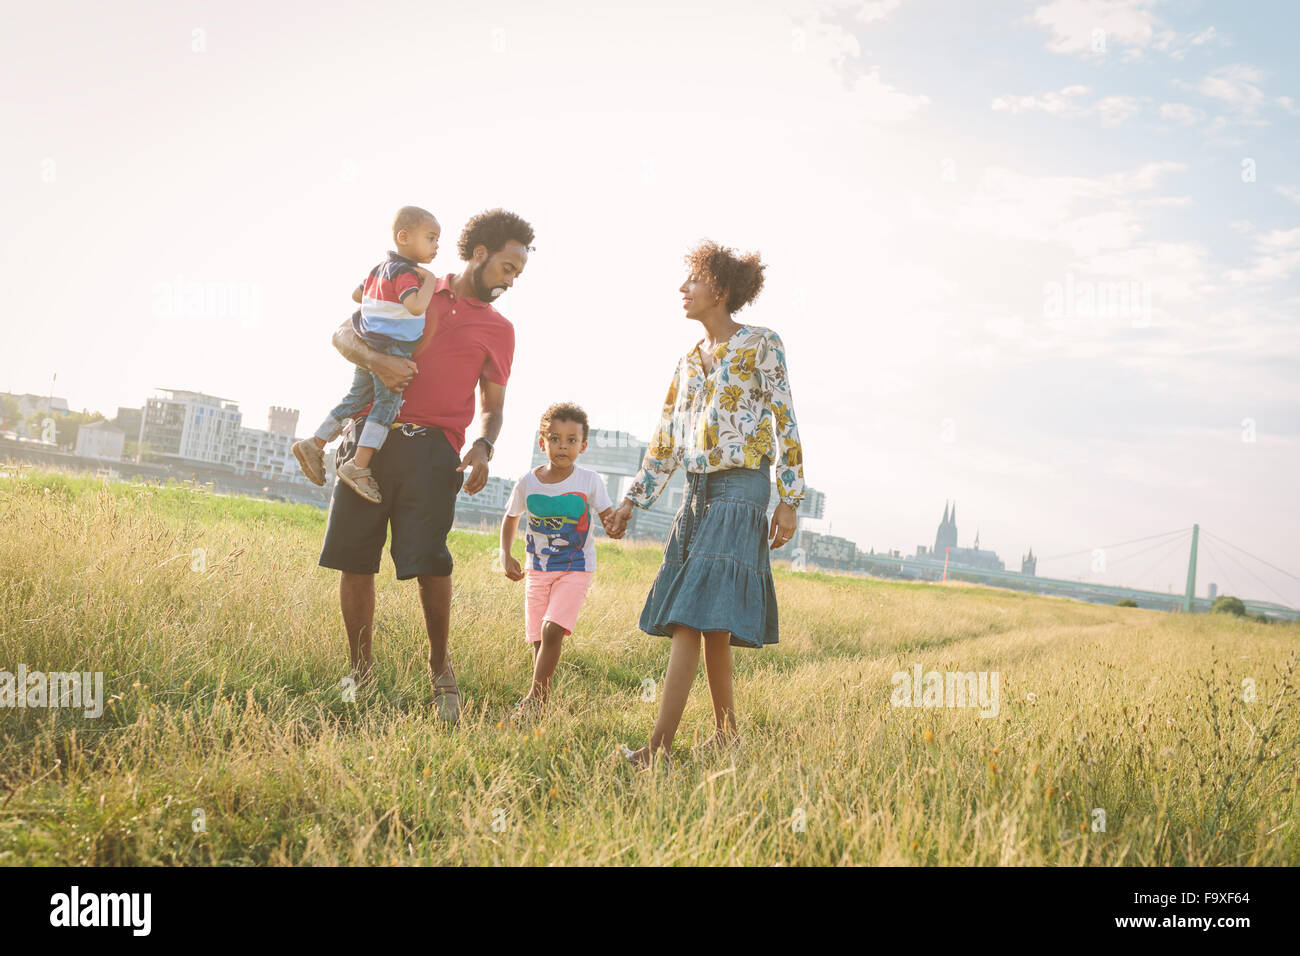 Germany, Cologne, family of four walking in a field Stock Photo